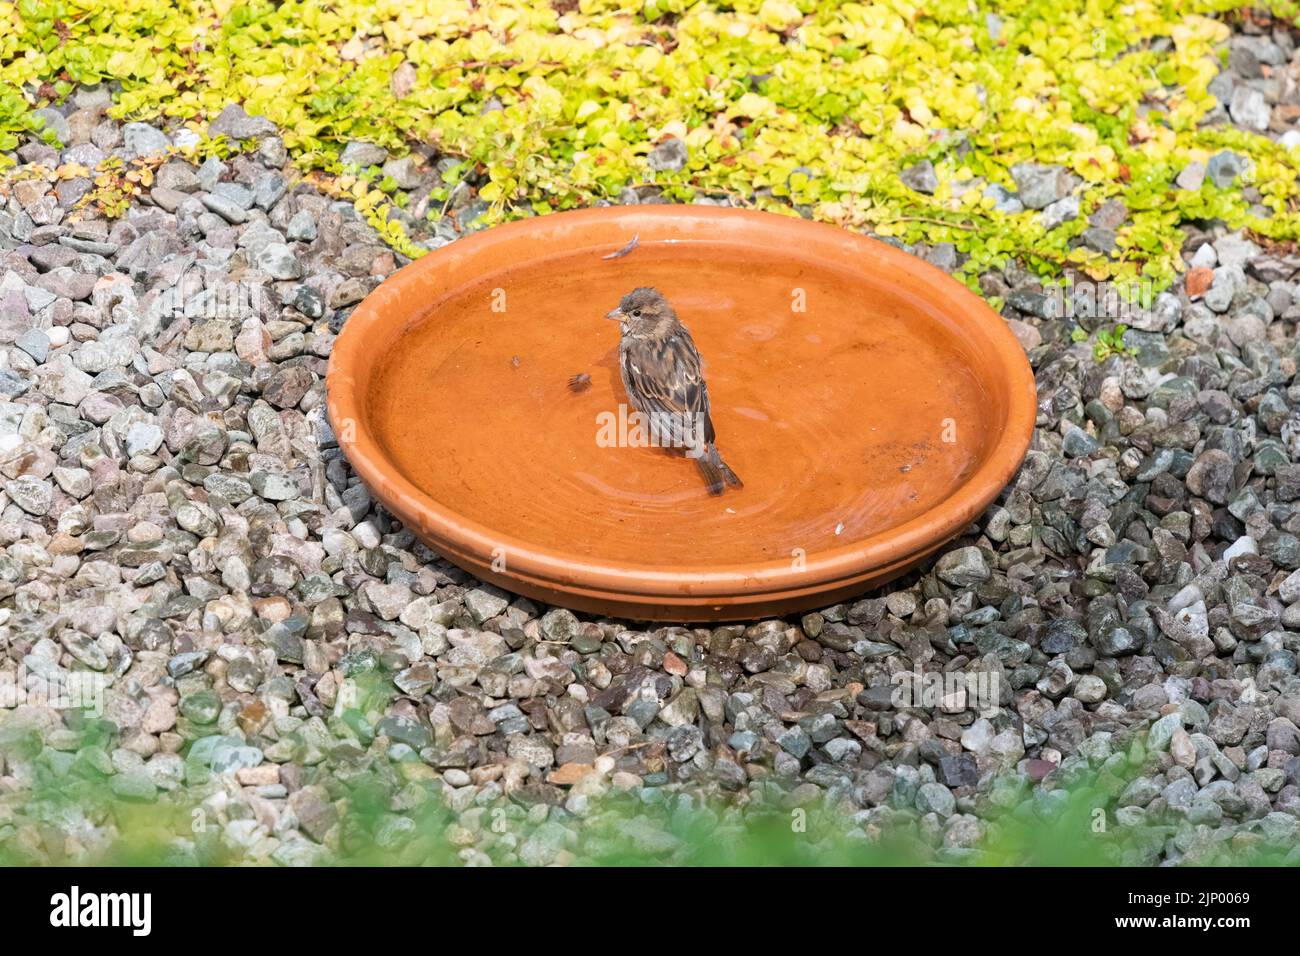 terracotta saucer bird bath being used by a house sparrow in uk garden Stock Photo